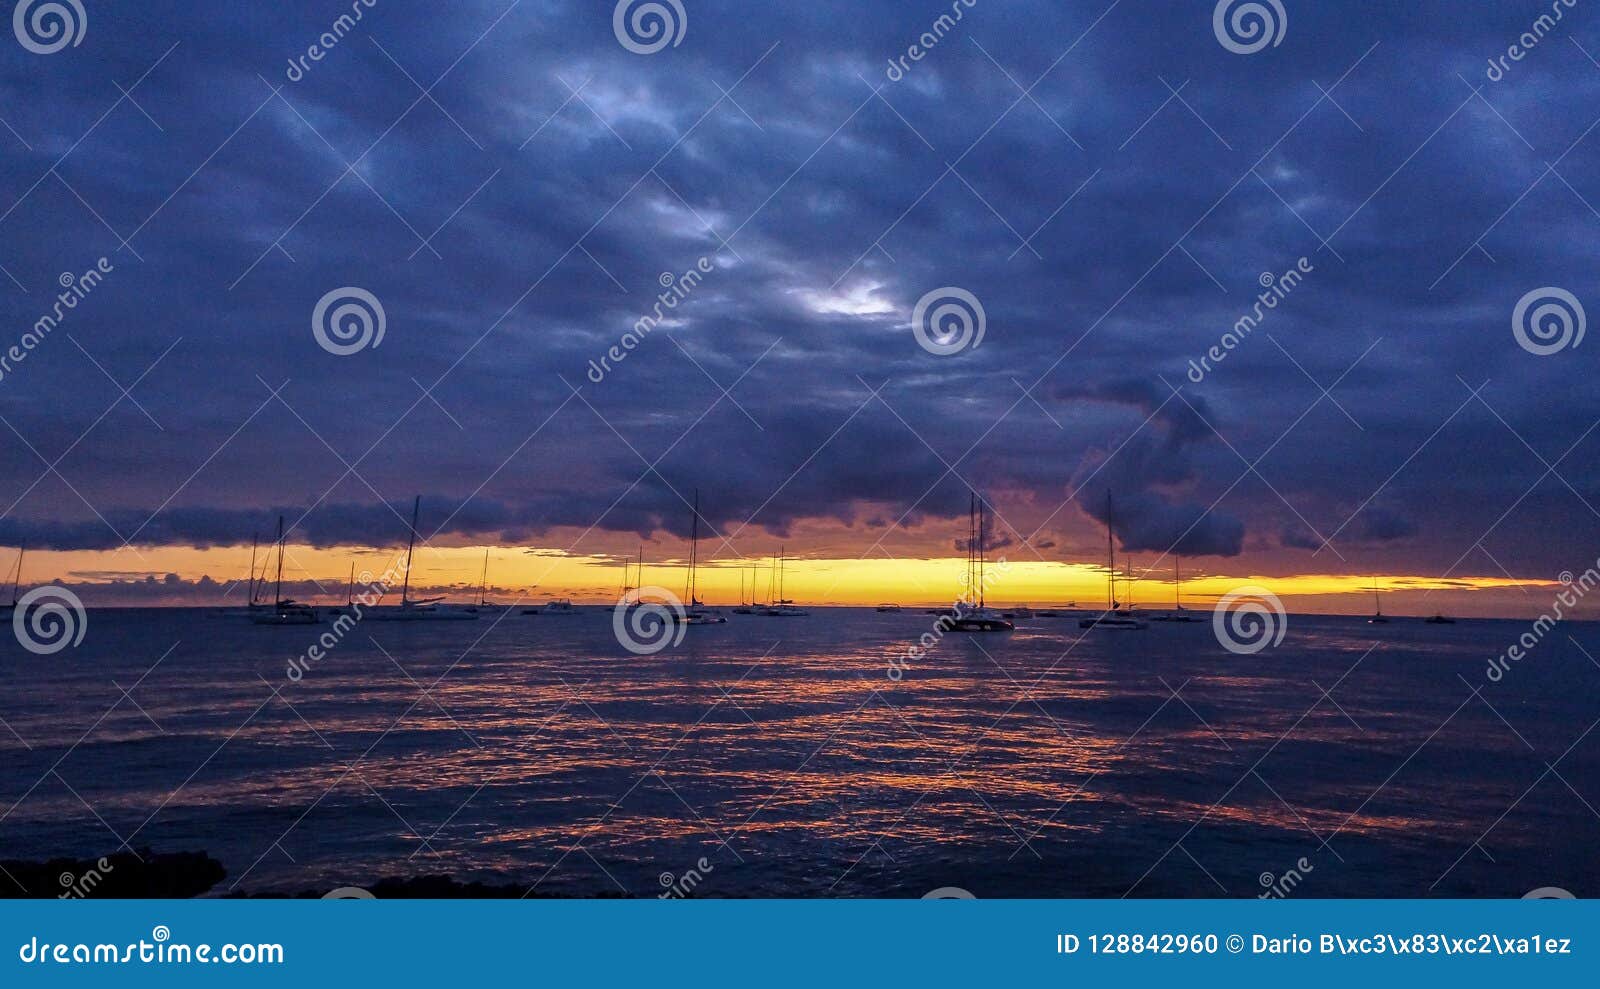 sunset on the beach with a view of the boats